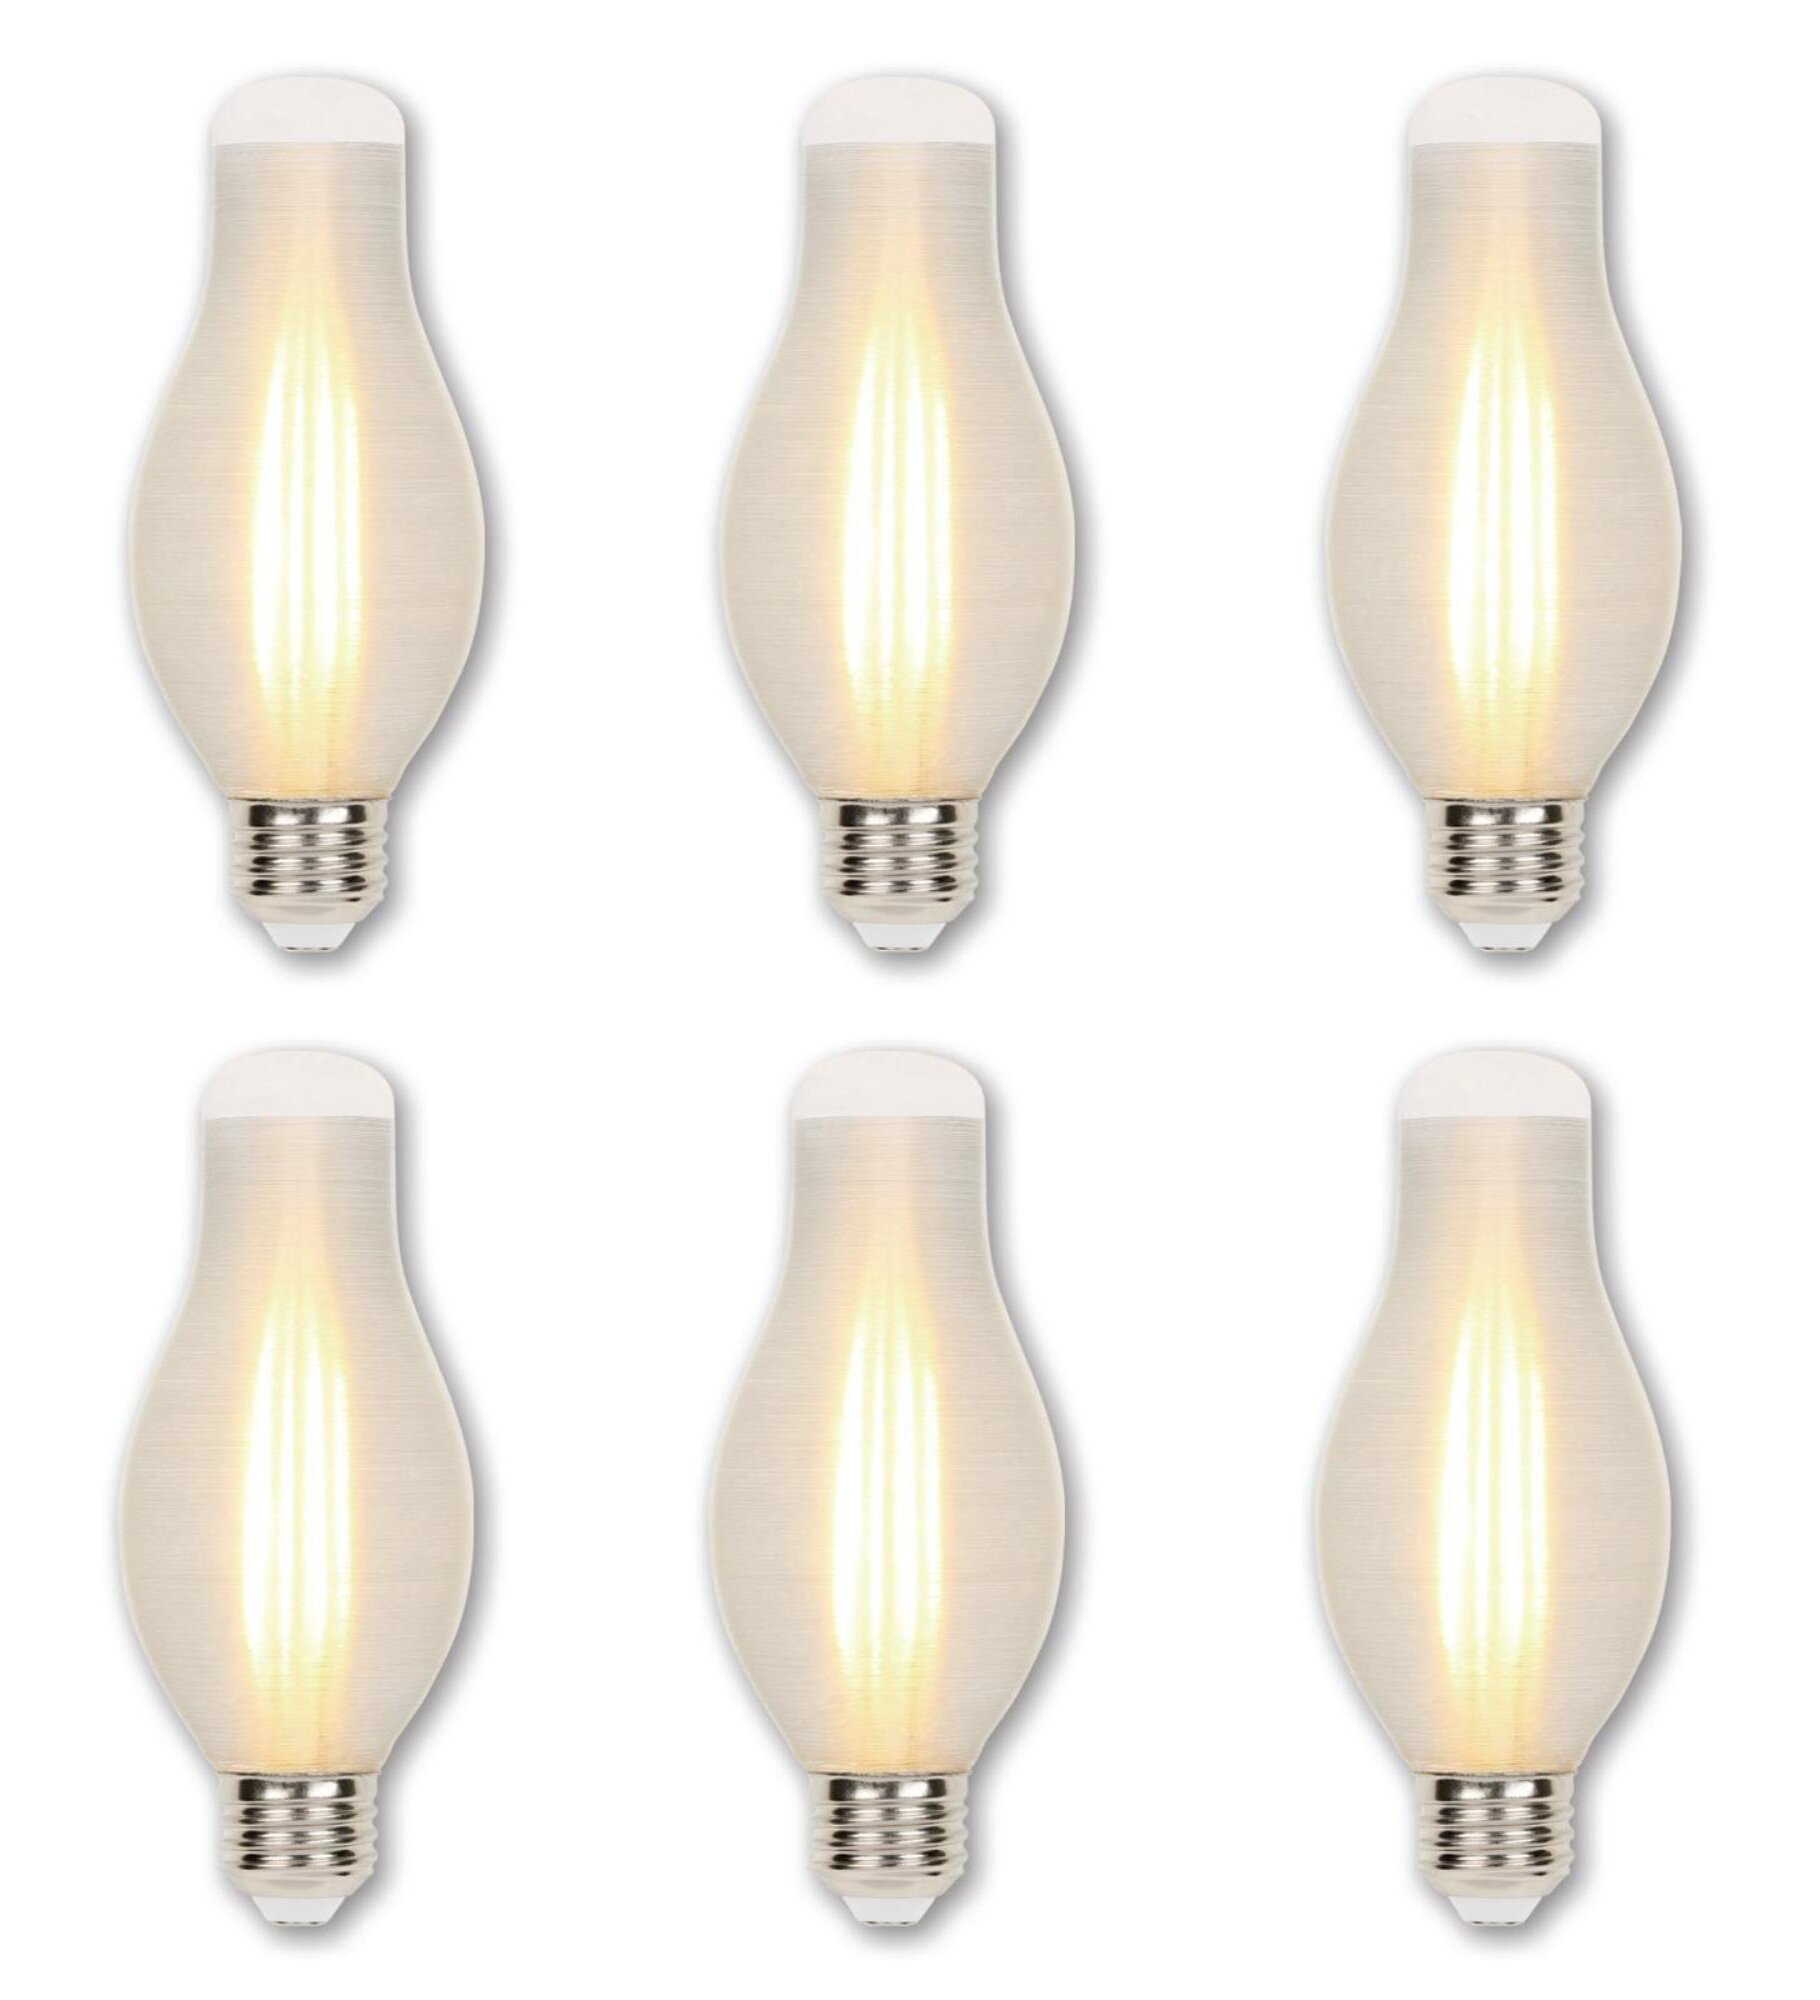 UL Listed,Daylight for Restaurant,Home 2700K Warm White Light 650lm 4 Pack E26 E27 Screw Medium Base, No Dimmable Antique Vintage Edison Style A19 A60 Clear Glass LED Filament Light Bulbs 8W 